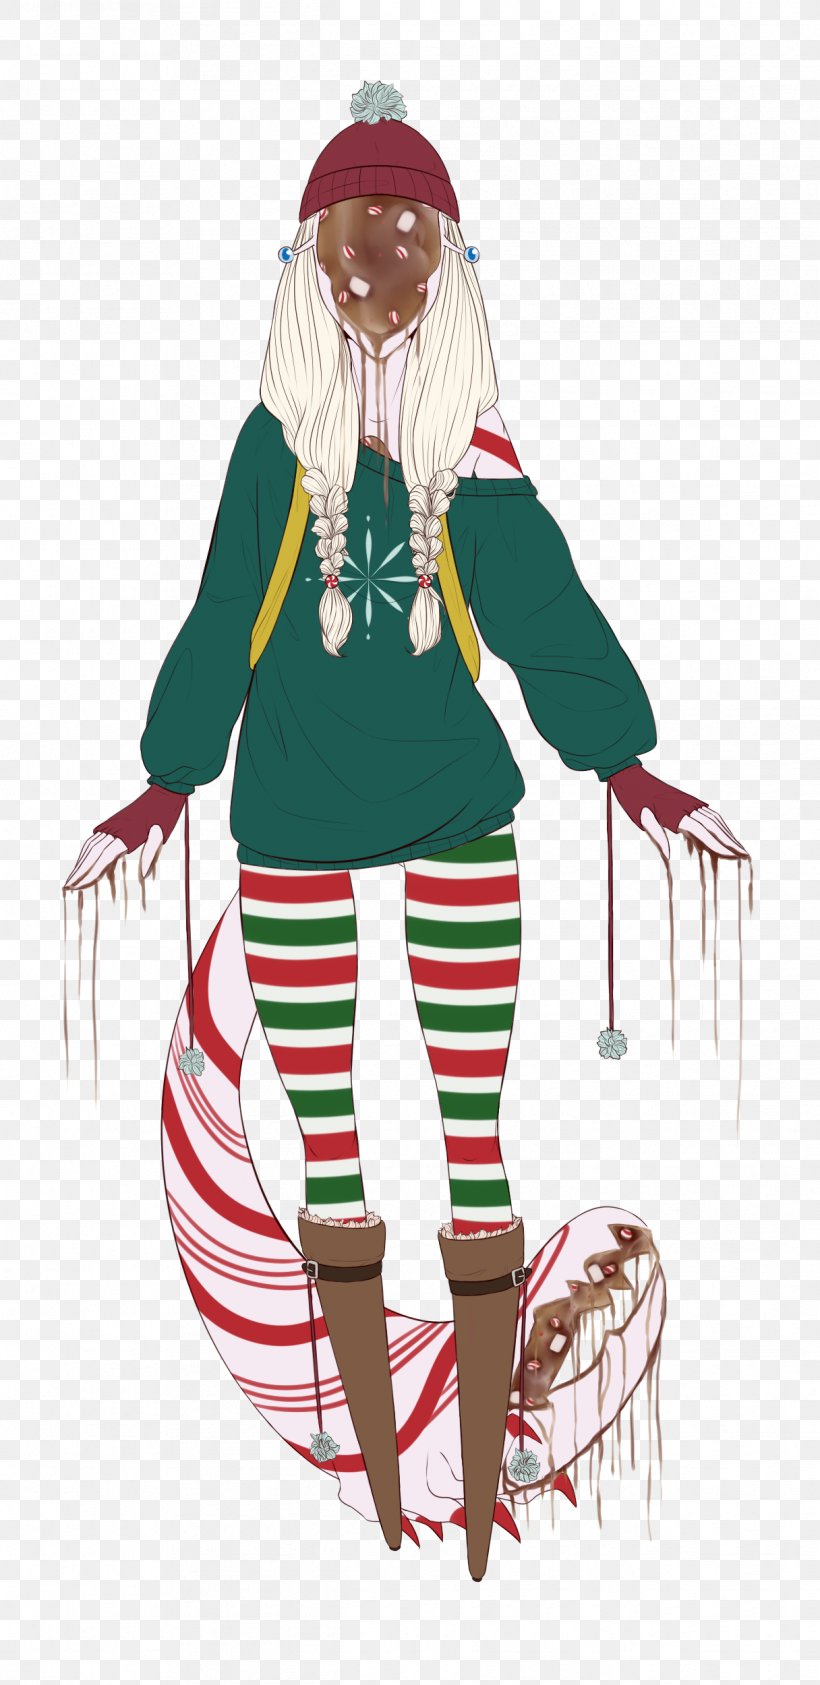 Christmas Ornament Santa Claus Costume, PNG, 1216x2500px, Christmas Ornament, Christmas, Christmas Decoration, Costume, Fictional Character Download Free